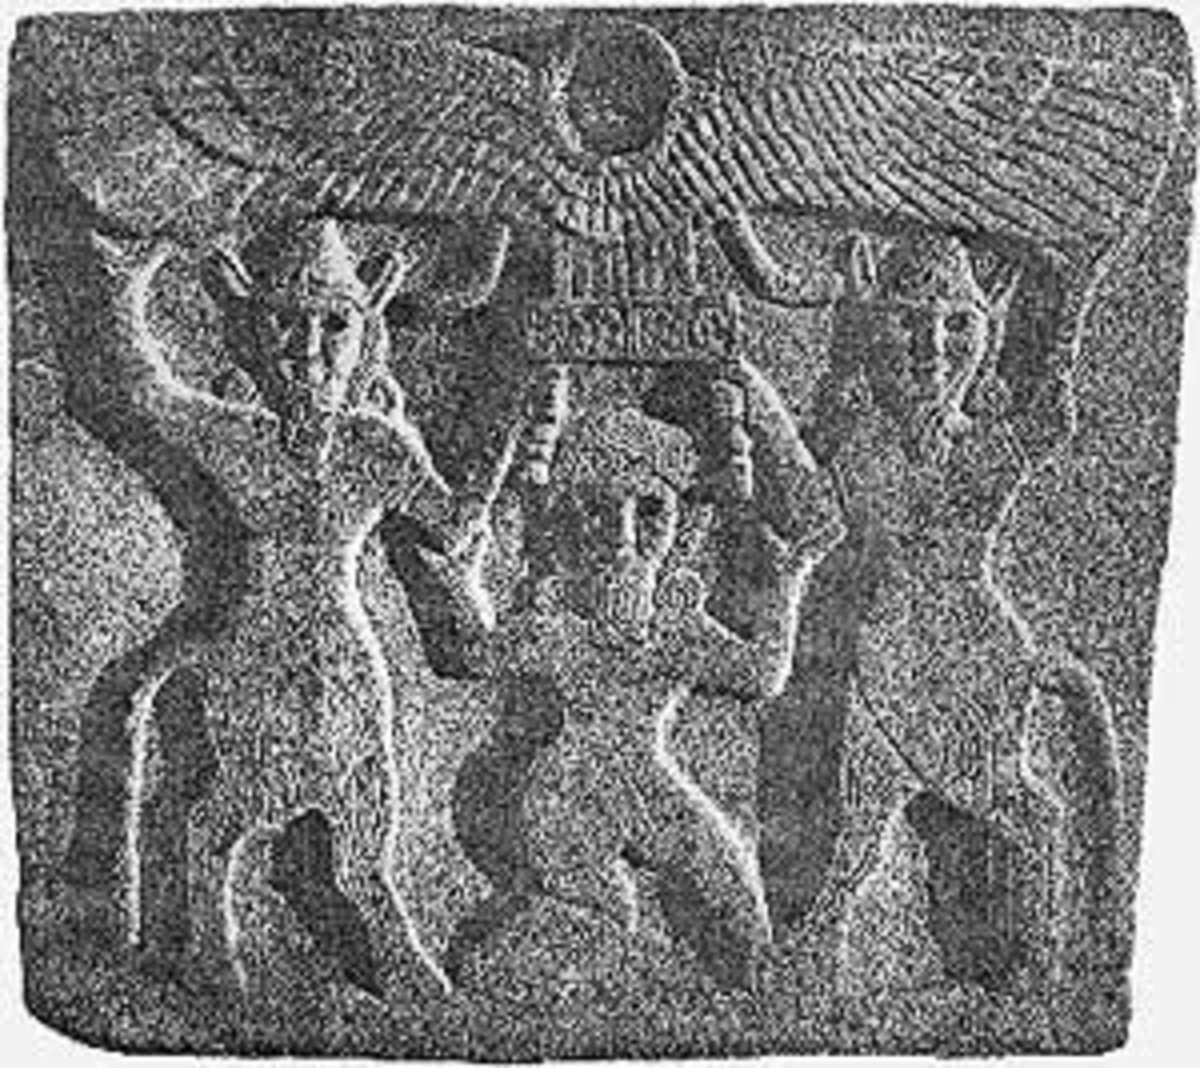 The Role of Women in the Epic of Gilgamesh